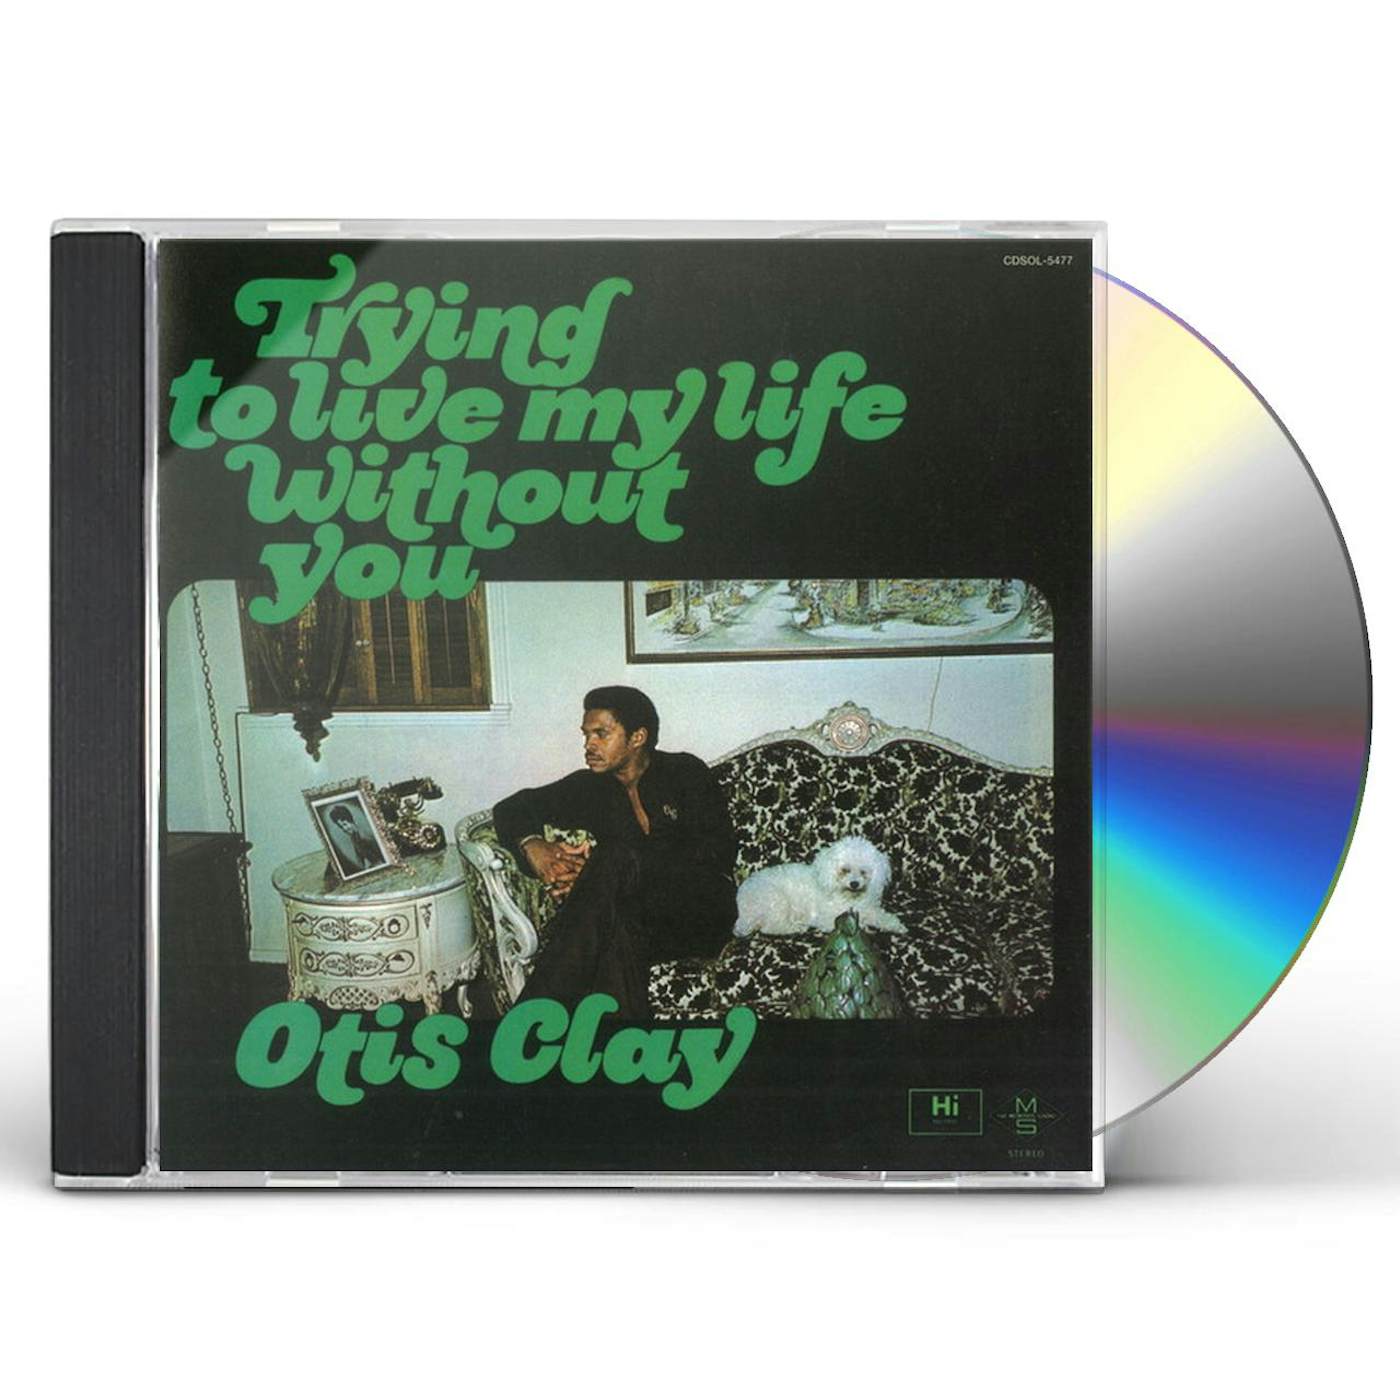 Otis Clay TRYING TO LIVE MY LIFE WITHOUT CD